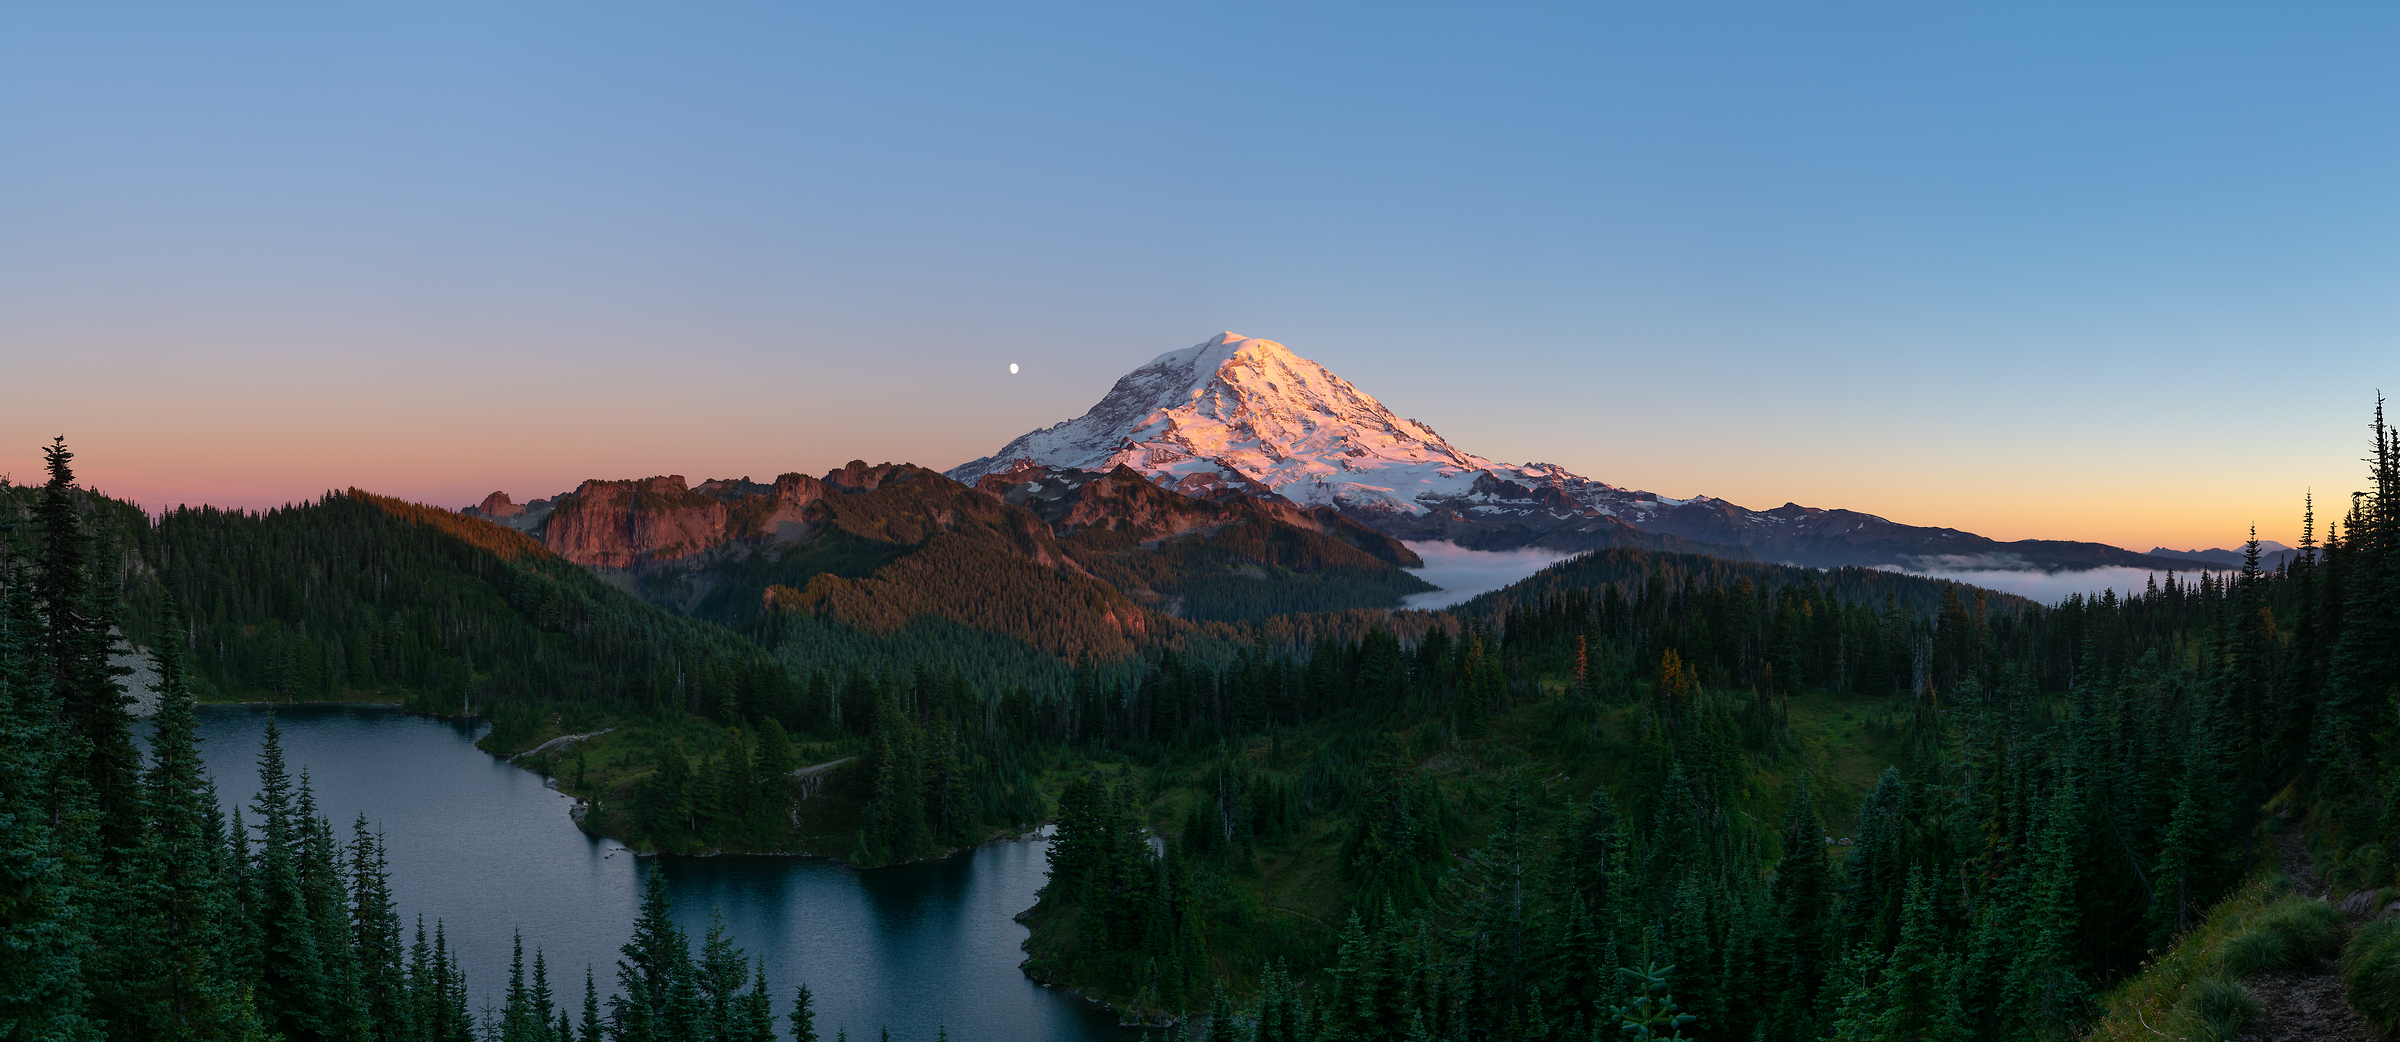 172 megapixels! A very high resolution, large-format VAST photo print of Mount Rainier and the moon at sunset; landscape photograph created by Greg Probst in Mount Rainier National Park, Washington.